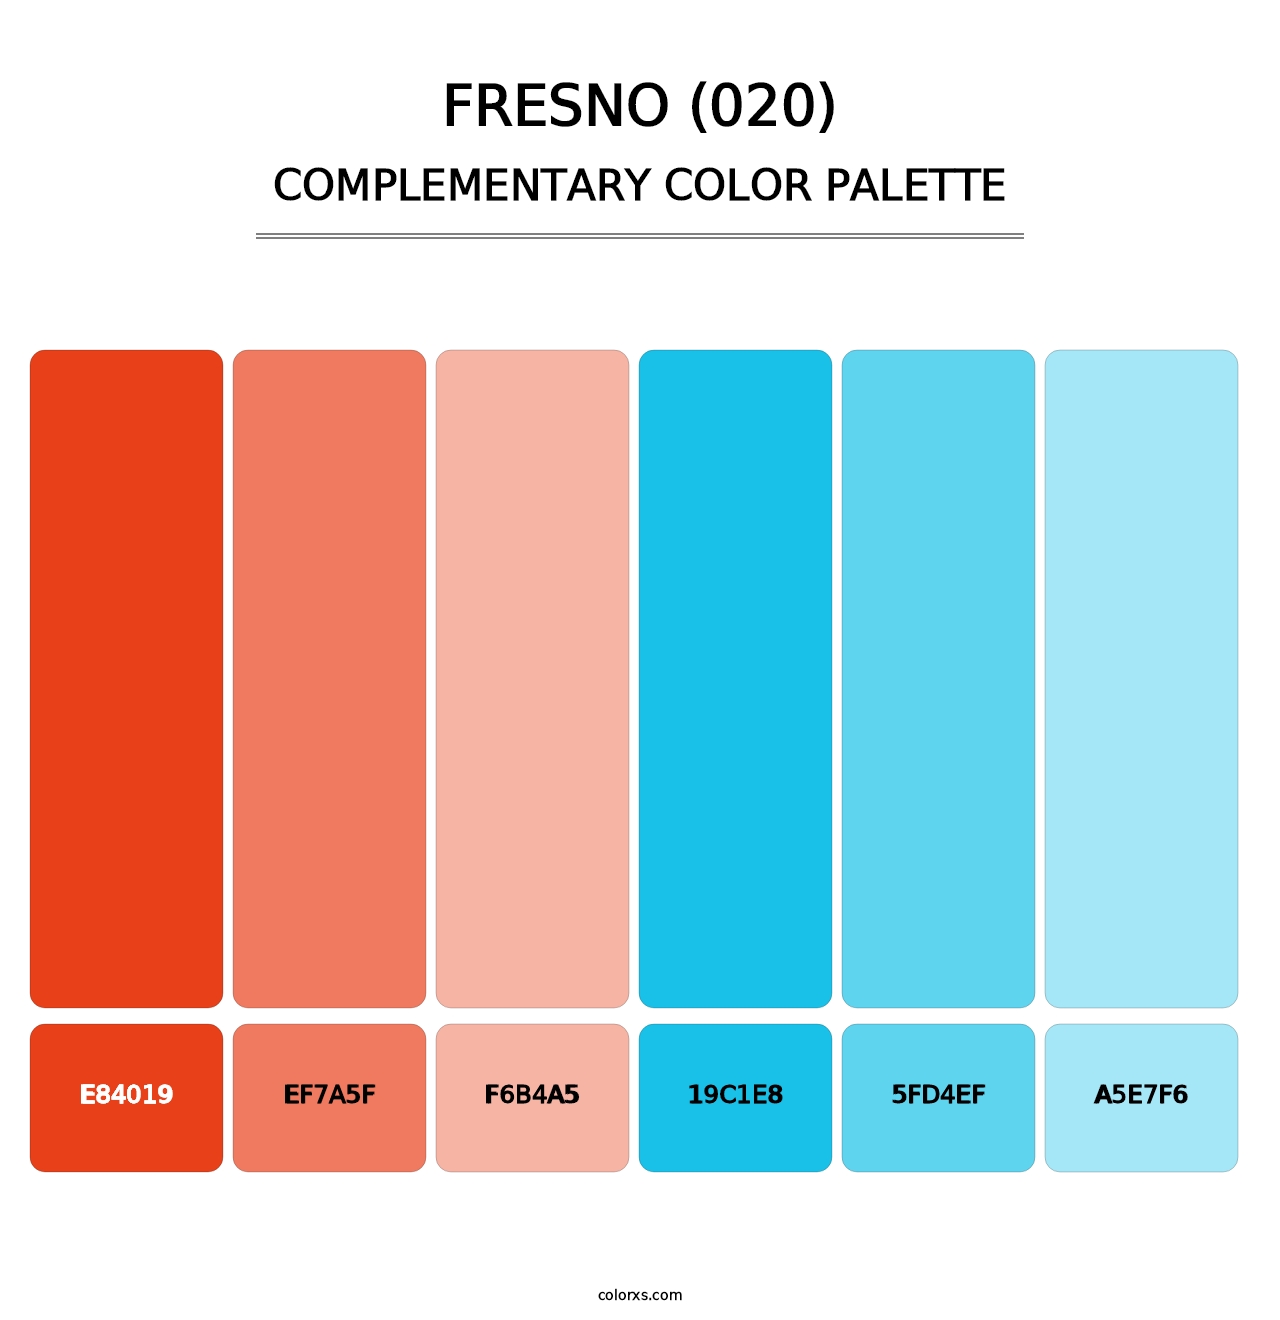 Fresno (020) - Complementary Color Palette